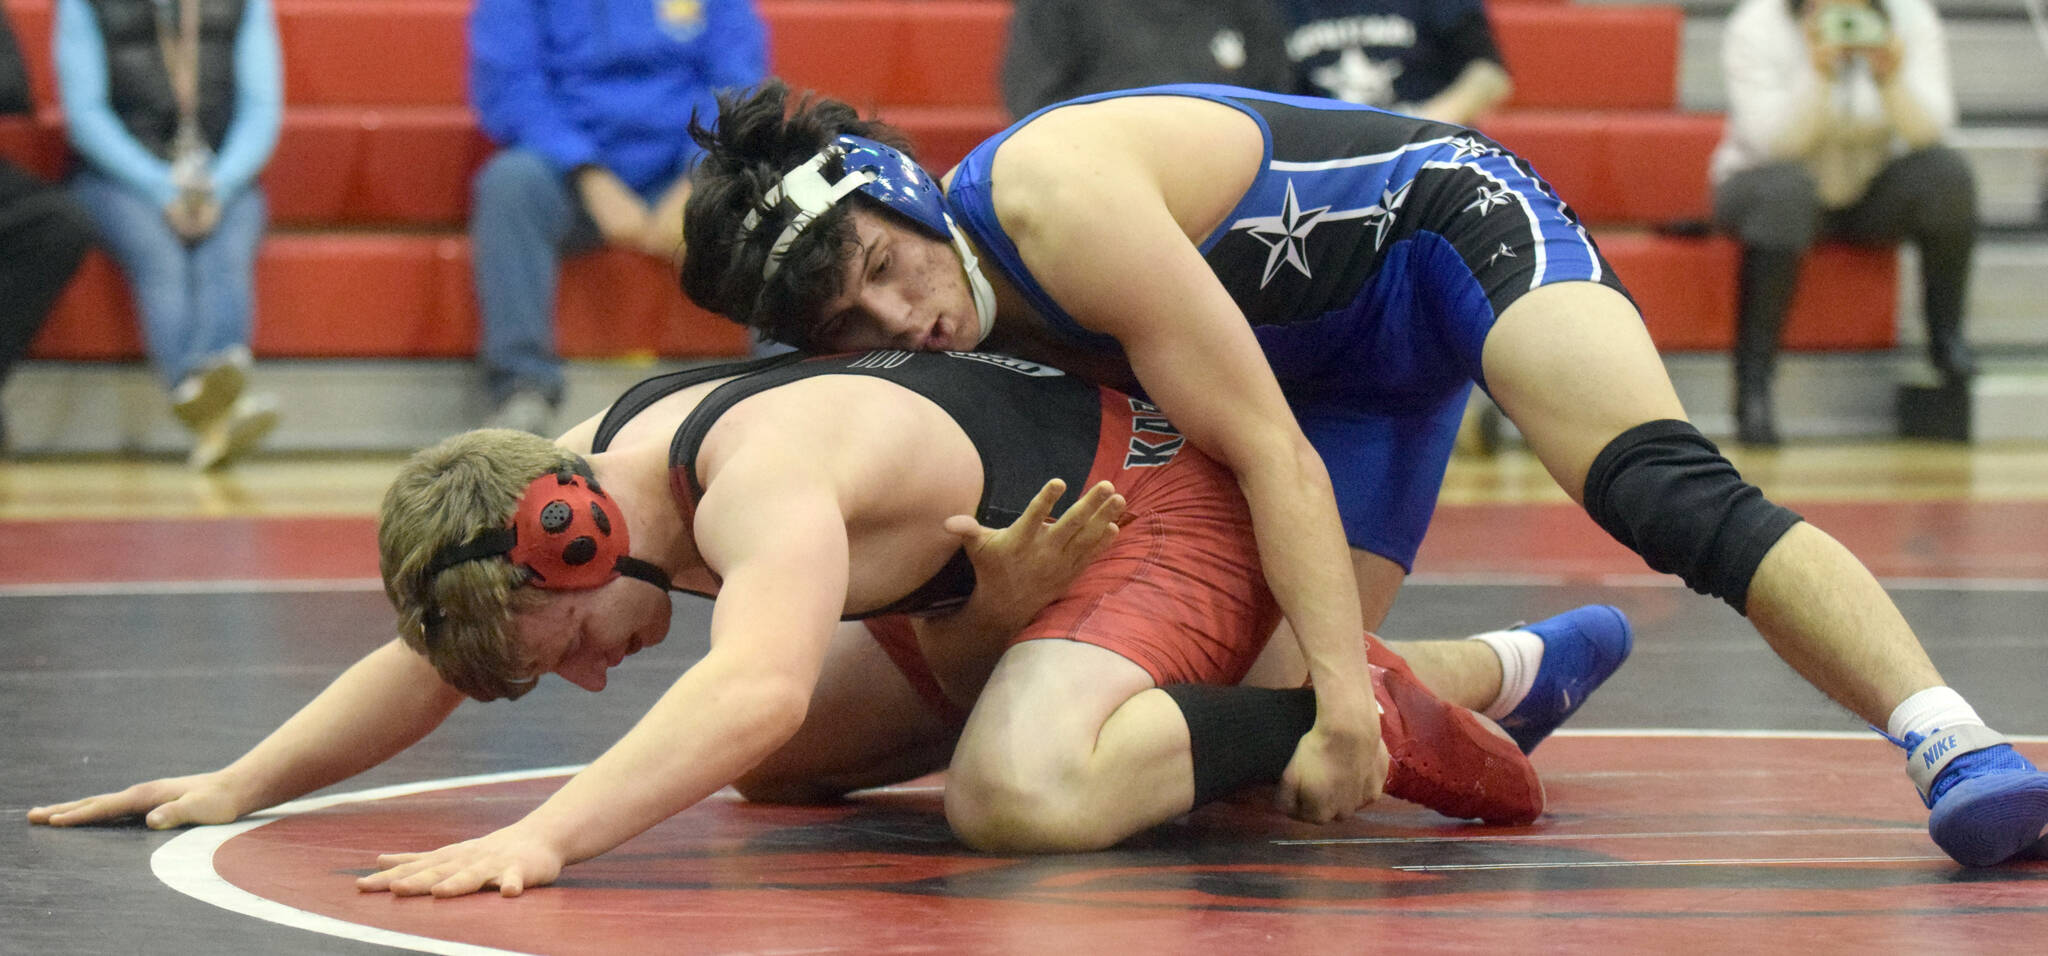 Soldotna’s Isaac Chavarria wrestles to a major decision over Kenai Central’s Andrew Gaethle at 152 pounds during a dual meet at Kenai Central High School on Tuesday, Nov. 16, 2021, in Kenai, Alaska. (Photo by Jeff Helminiak/Peninsula Clarion)